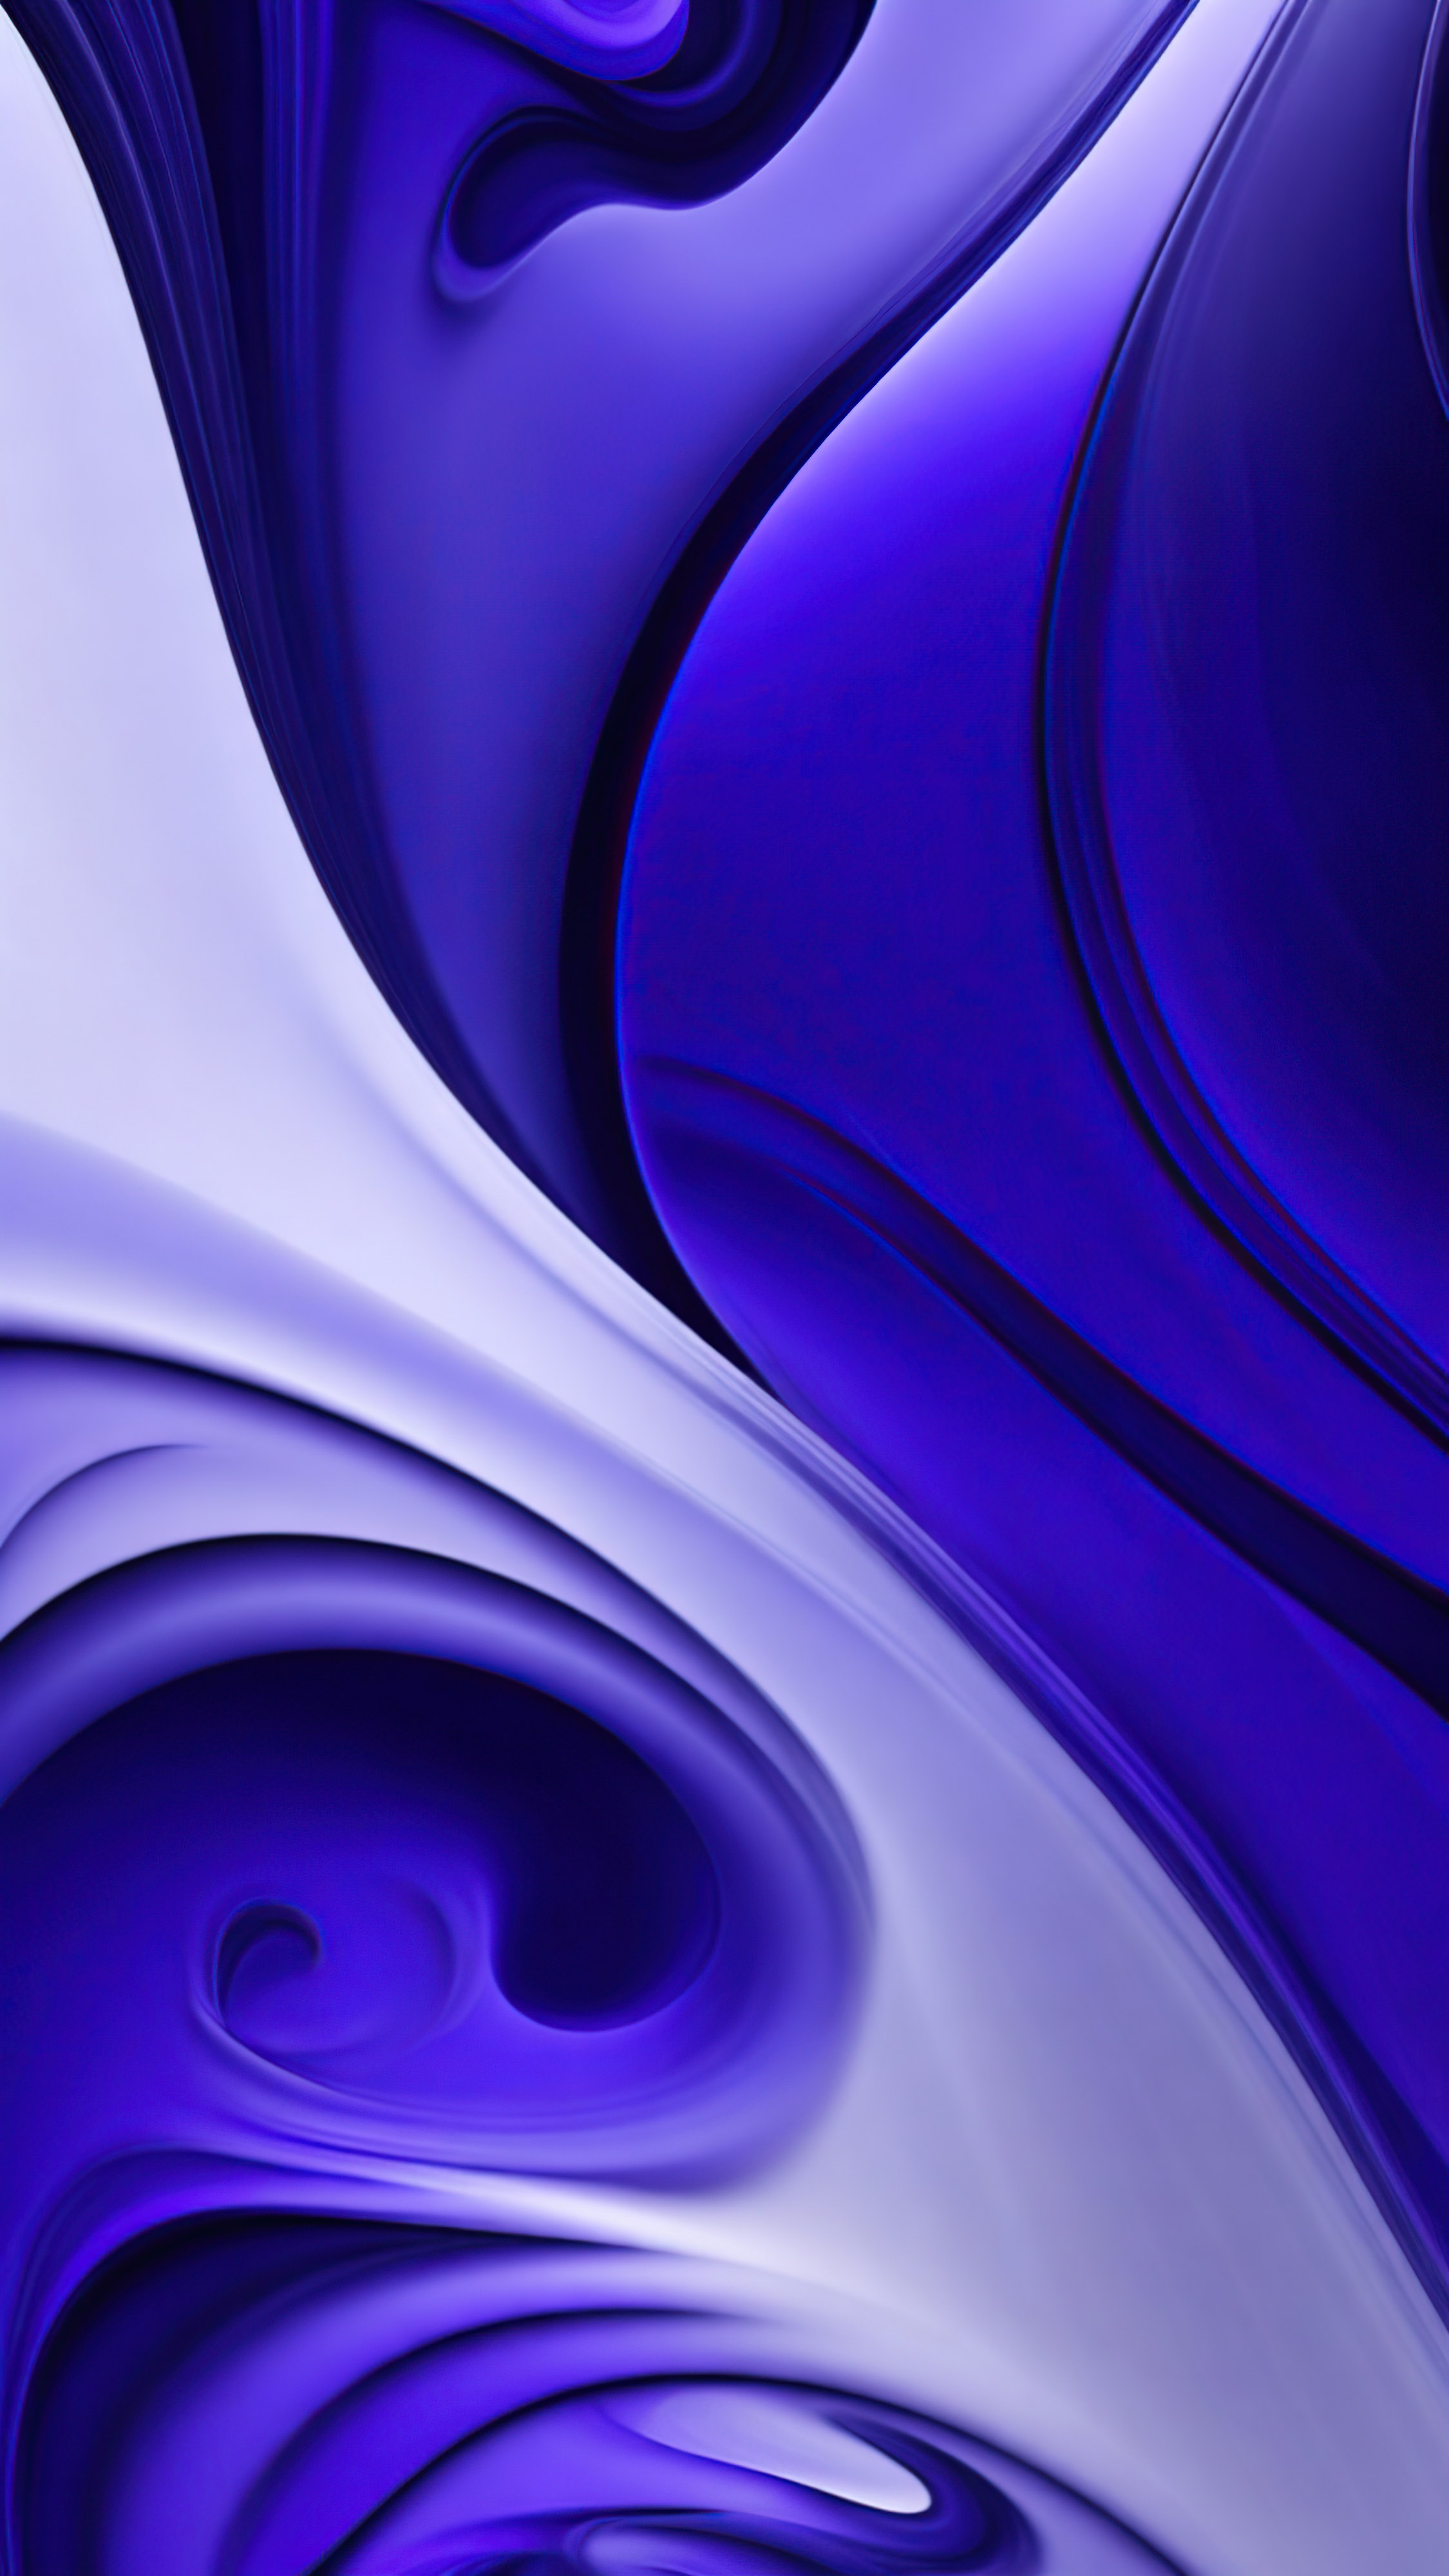 Admire the elegance of our iPhone purple wallpaper in 4K, with an abstract art piece that presents a mysterious yet elegant mood through its smooth, flowing shapes in a mix of dark and vibrant colors, adorned with intricate swirling patterns against a dark background.